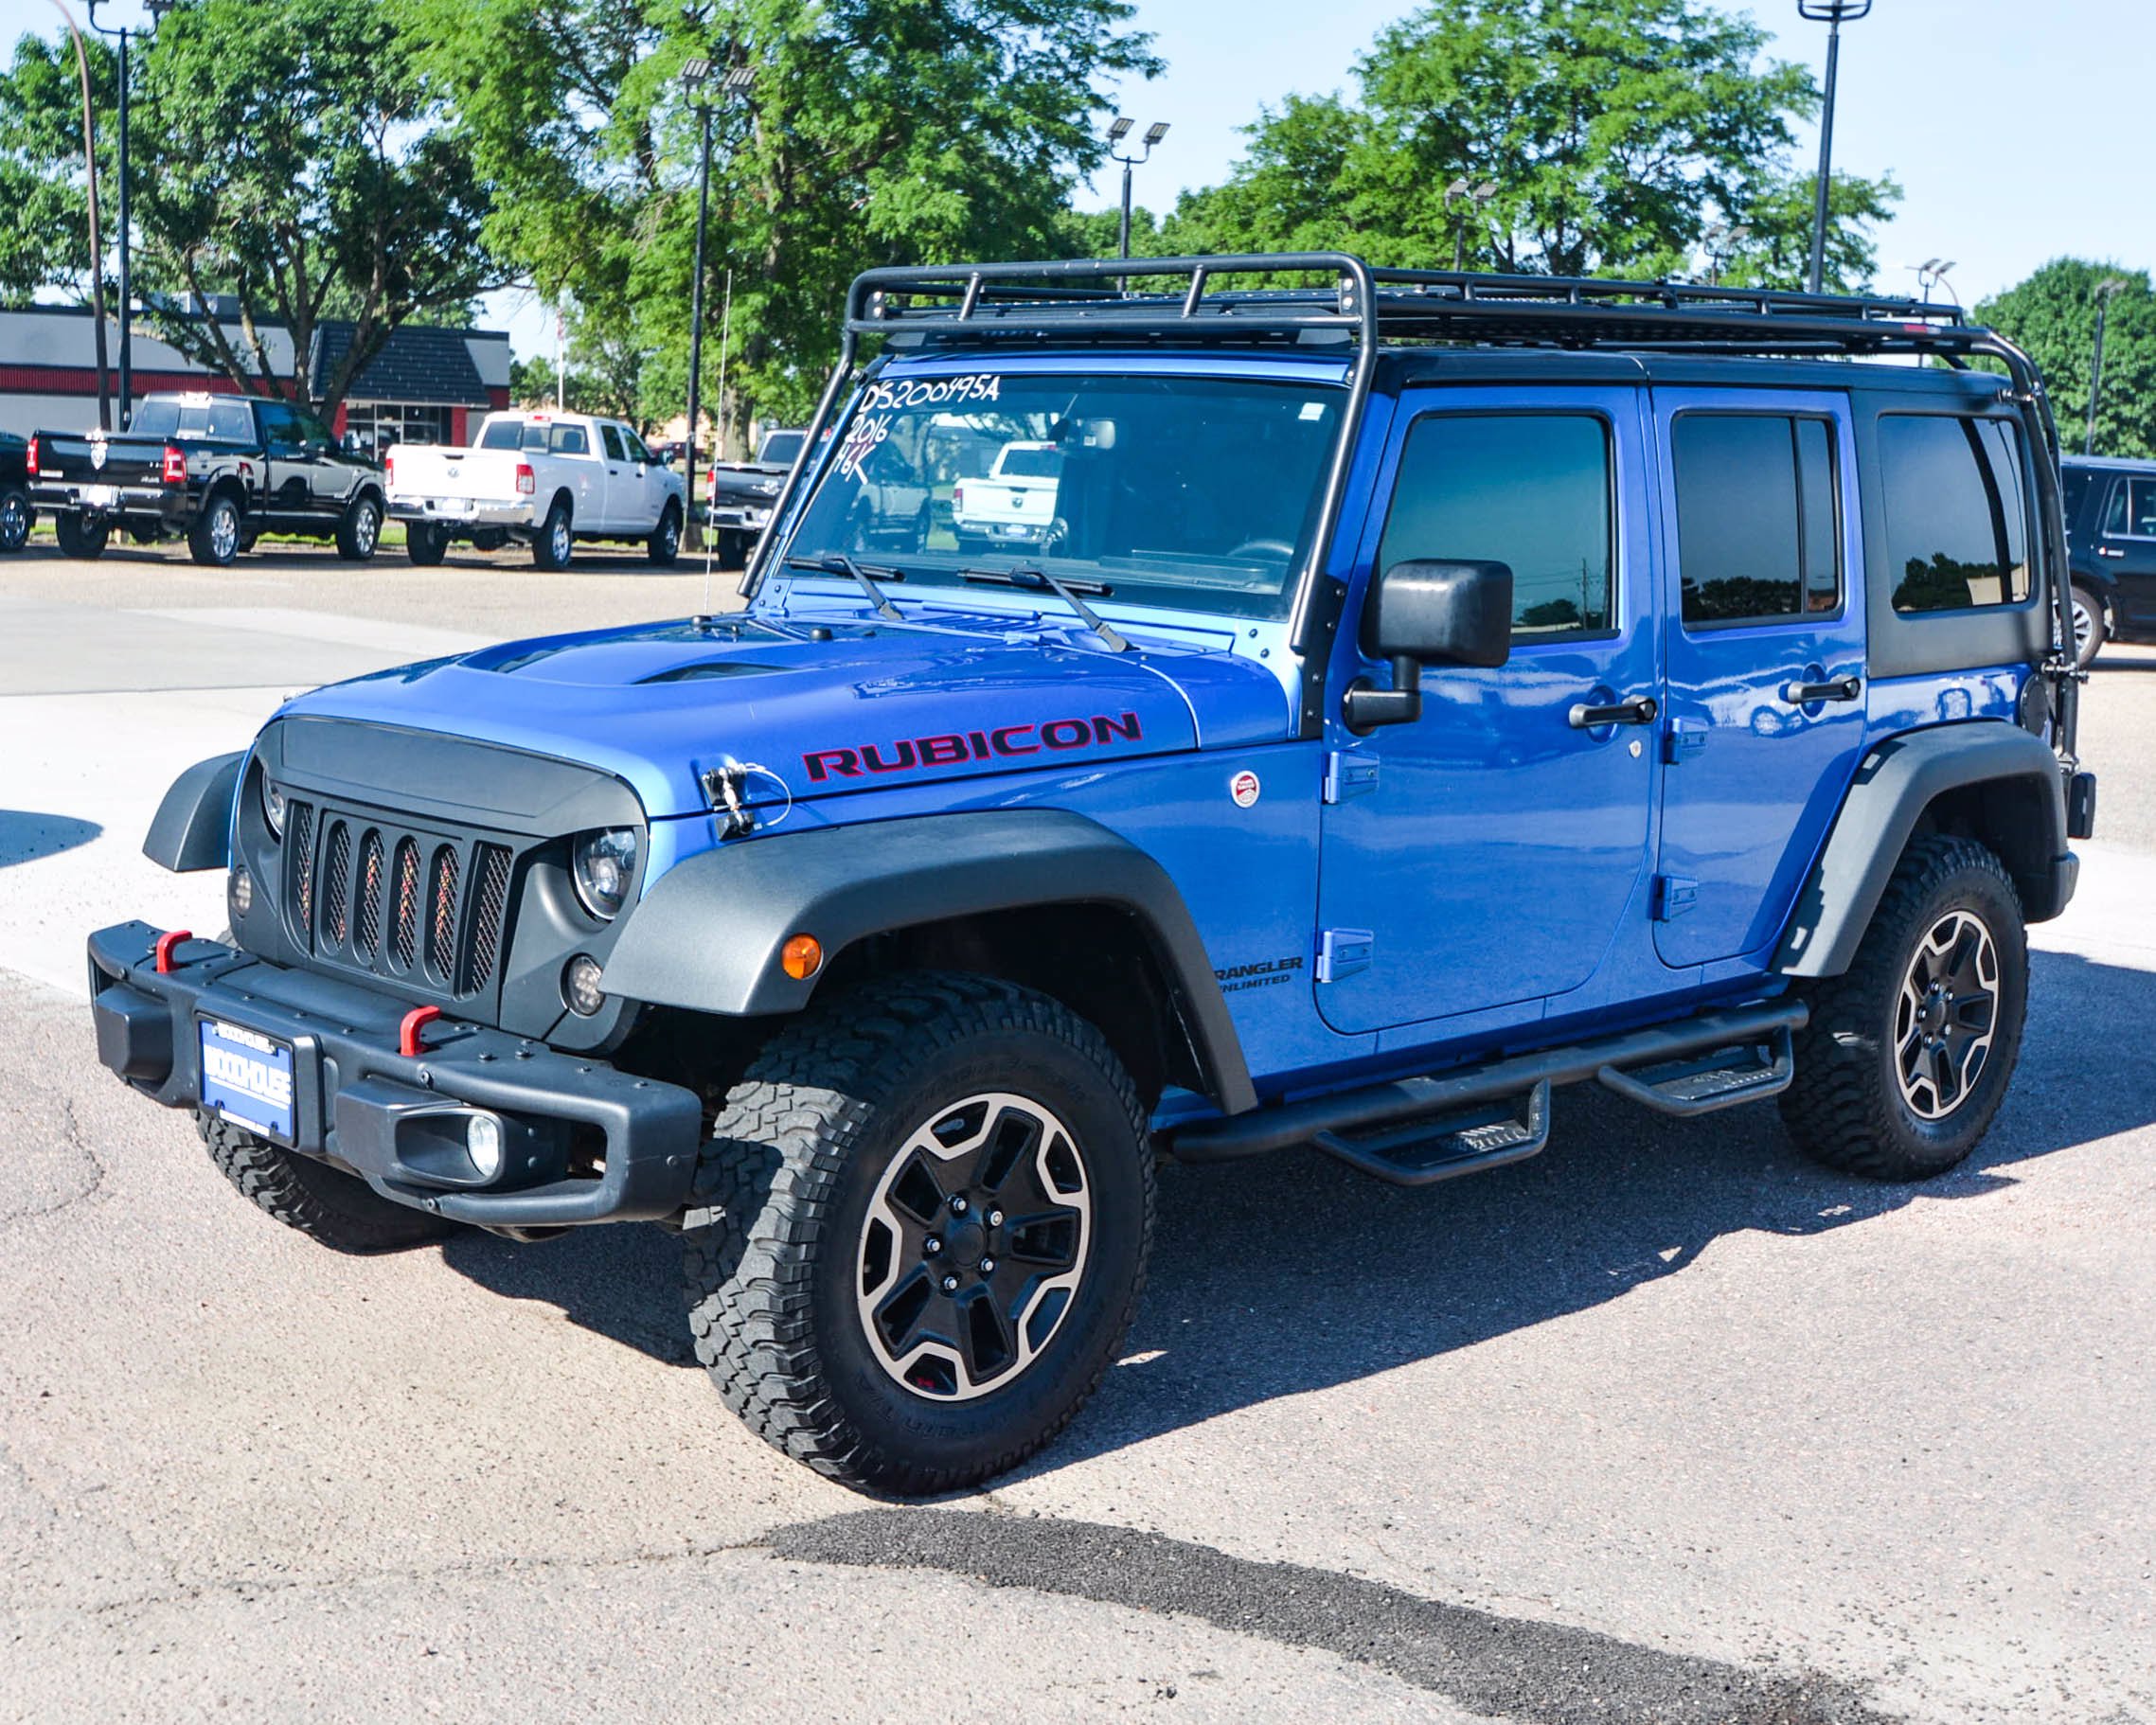 PreOwned 2016 Jeep Wrangler Unlimited Rubicon Hard Rock 4WD